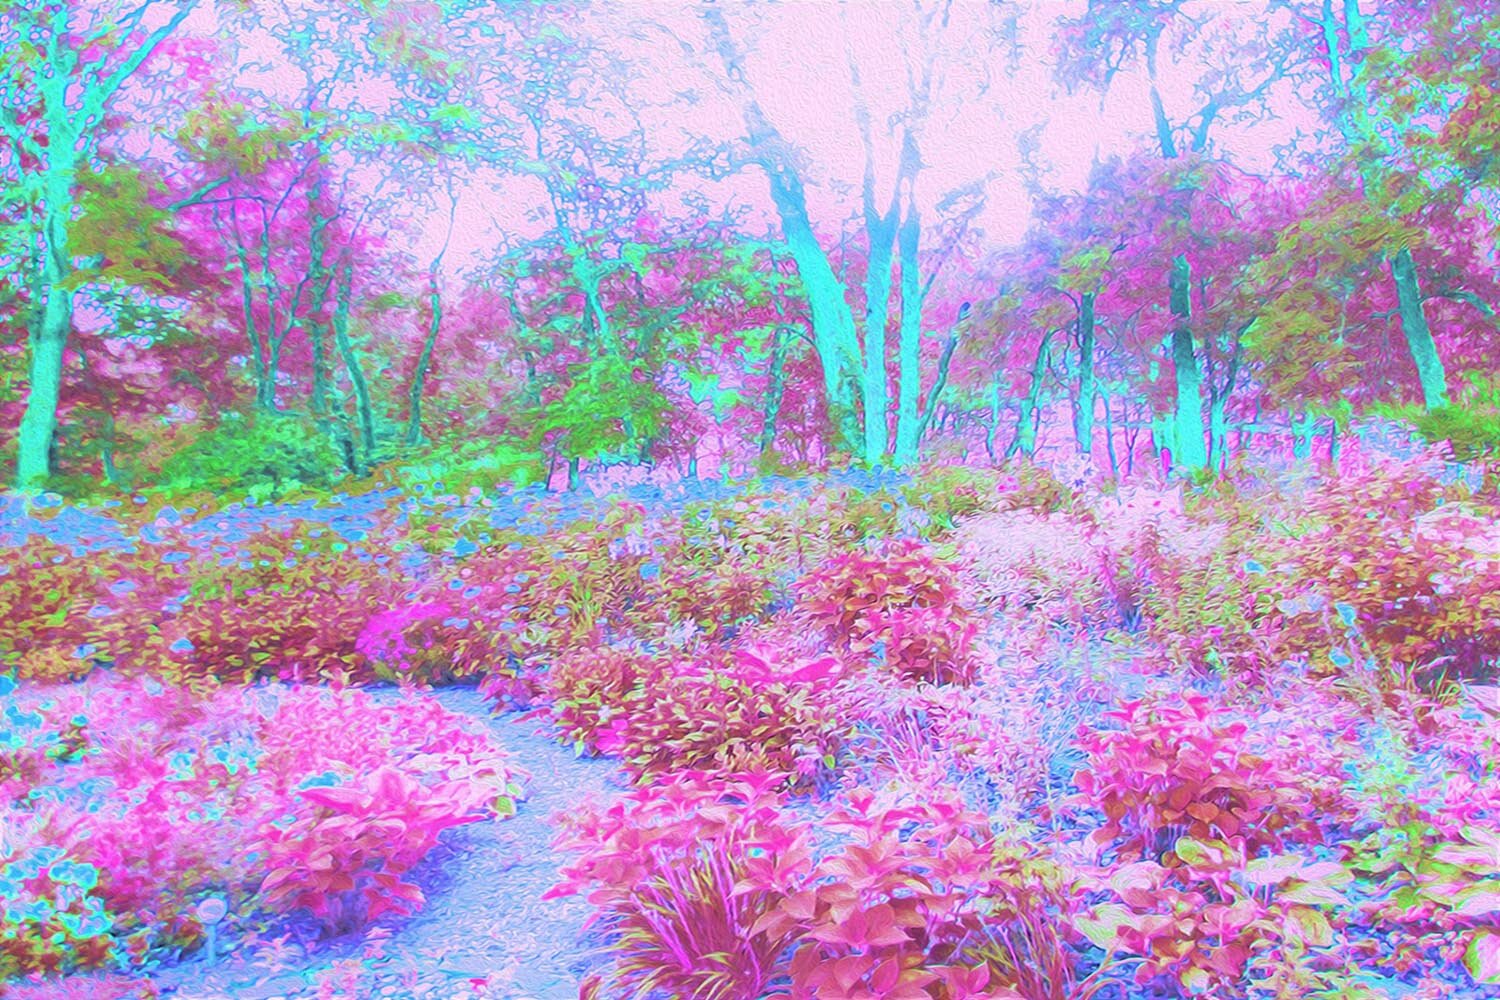 Impressionistic Pink and Turquoise Garden Landscape